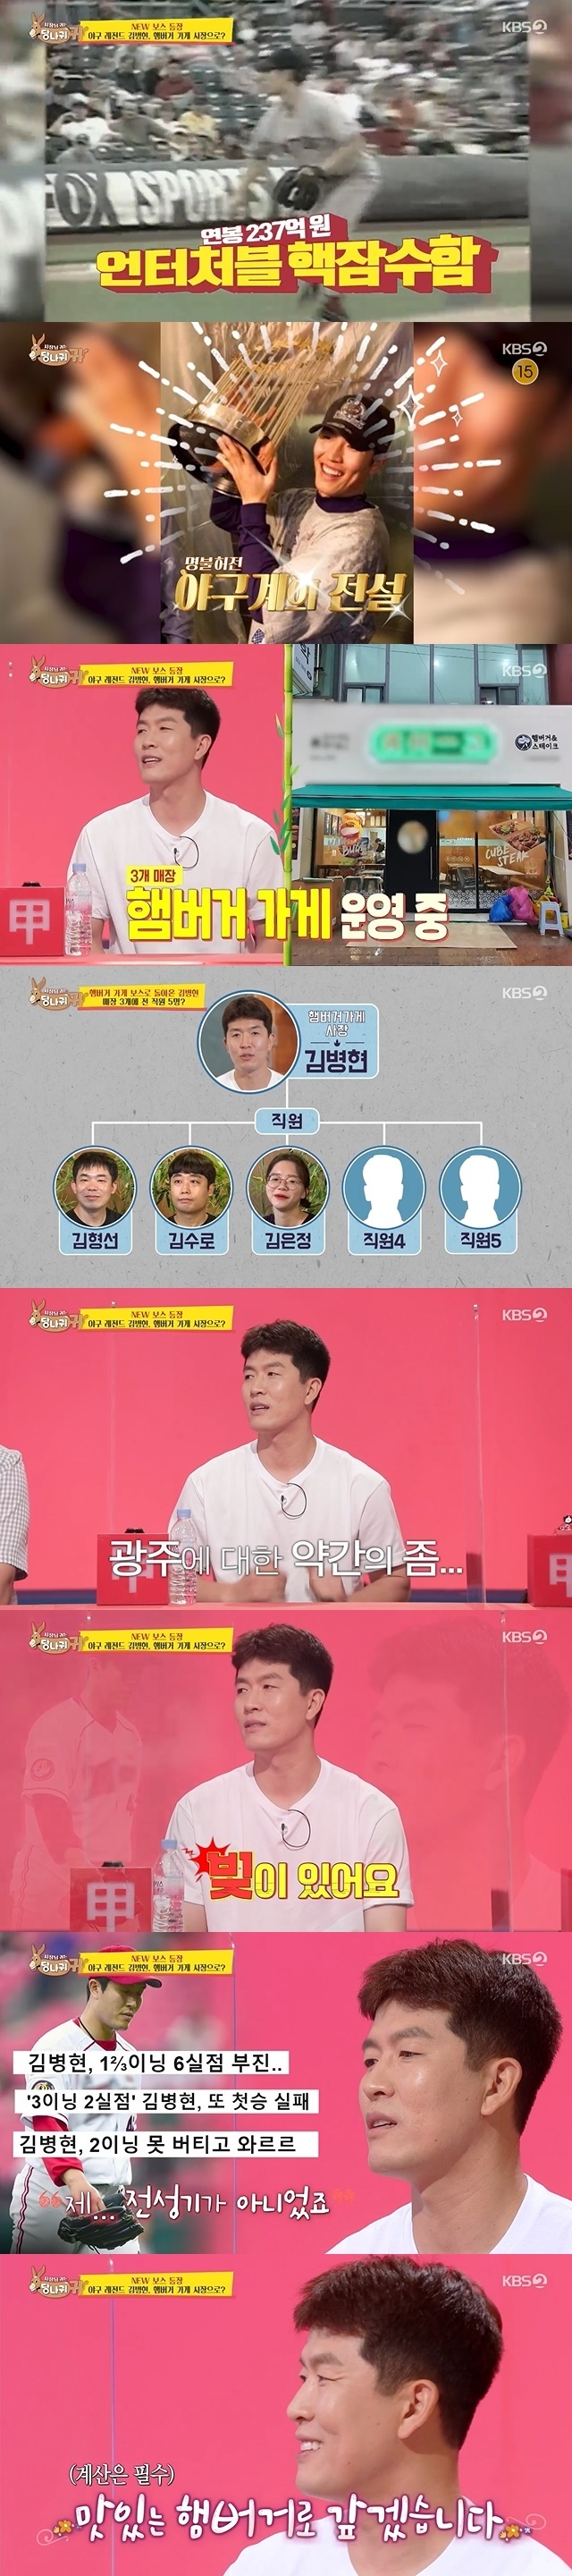 Salary 23.7 billion major leaguer Kim Byung-hyun became the president of the Hamburger store of five employees to pay off the debt.In the 121st KBS 2TV entertainment Boss in the Mirror (hereinafter referred to as Donkey Ear) broadcast on August 29, former major leaguer Kim Byung-hyun of Salary 23.7 billion scrambled as a new boss.Kim Byung-hyun is a former World Class Baseball player who has entered United States of America with a past 2.7 billion down payment.But he was the boss who currently runs three Hamburger houses.Kim Byung-hyun said, The IMF came at the time and the exchange rate was 1,900 won, adding that it is about twice the value of the current price.To Kim Byung-hyun, who turned into a boss after this past, Jun Hyun-moos sharp words I do not need to go to Hamburger were directed.Kim Byung-hyun said, I did it then, but now it is hard, he said, I want to have another hobby if I have a hobby.The three Hamburger stores in Kim Byung-hyun were all located in Gwangju Metropolitan City.Kim Byung-hyun made unexpected confessions about setting up a store in Gwangju, not Seoul, because I have a debt to Gwangju.When I came to Korea playing at United States of America, it was not my prime, I didnt show myself doing well as a player.I hated myself so much at the time and was hard; I owe it to him, so I try to get it back (to get it back). Kim Byung-hyun also rejected the Baseball coach proposal to do so.The reason why it was a Hamburger shop was also related to Baseball player life.Kim Byung-hyun said, Baseball is a Hamburger if United States of America is a Hamburger. Baseball and Hamburger thought they could not be separated.Kim Byung-hyun wanted to hang out as a hamburger with the crowd looking for Baseball park.But Kim Byung-hyuns store was more than I thought: three stores and five employees.So Jun Hyun-moo said, Is not it almost a branch manager because it is one branch (employee)? Kim Byung-hyun explained, I cut the number of people because of Corona 19.Kim Byung-hyun naturally delivered a blow from Corona19.He said that the crowd did not flow into Corona 19 since September last year. It was a little quiet and 10% crowd came in, but I can not see Baseball eating something.Some of them have closed the door because of the blow to those who are doing business. Kim Byung-hyun has taken care of his hometown team Kia Tigers in such a difficult situation.Kim Byung-hyun has revealed a warm-hearted side that brings 70 Hamburger for junior players who train in the heat.